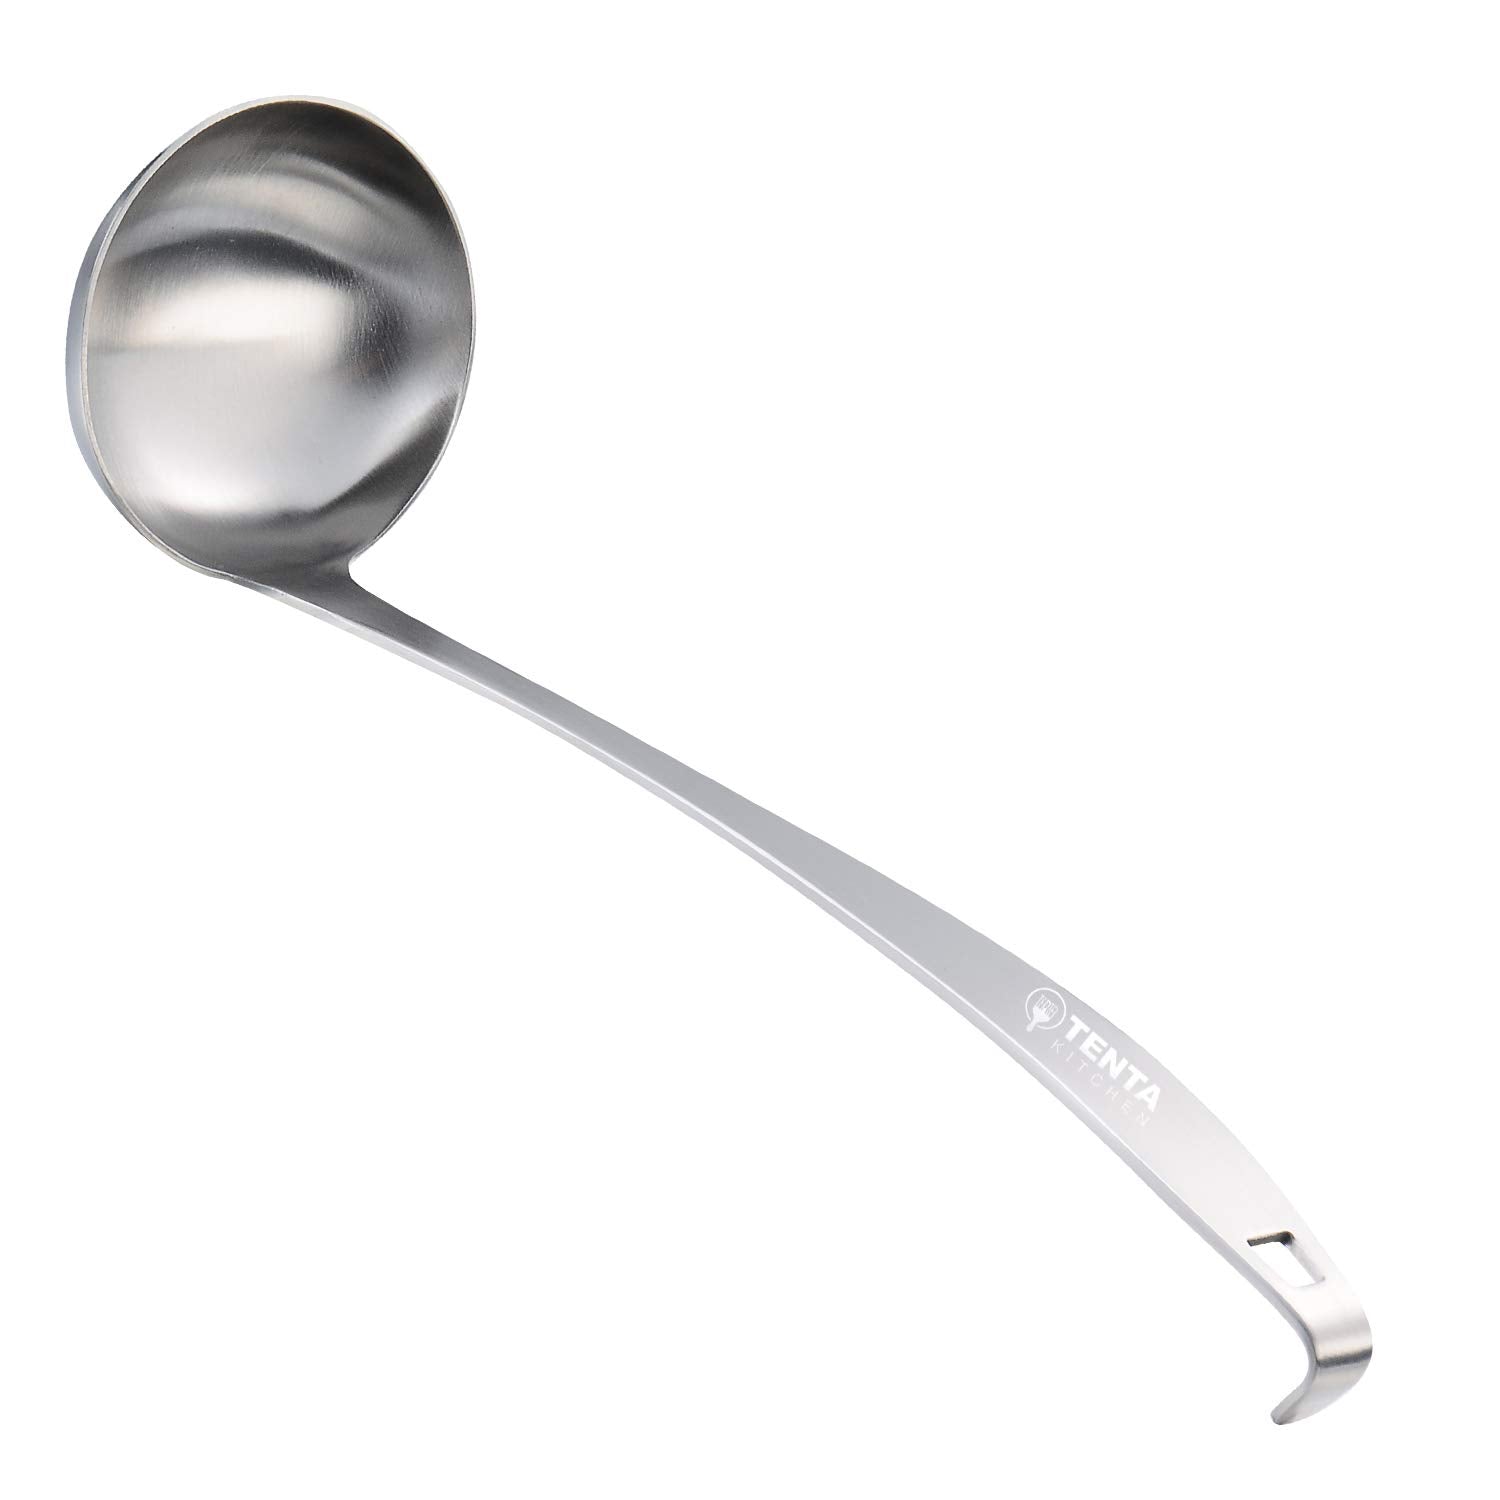 Tenta Kitchen 2oz/56ml Stainless Steel Small Soup Ladle Spoon,10.8”x 3” Ladle Stainless Steel – One-piece Professional Ladle With Hook And Hole For Convenient Hanging